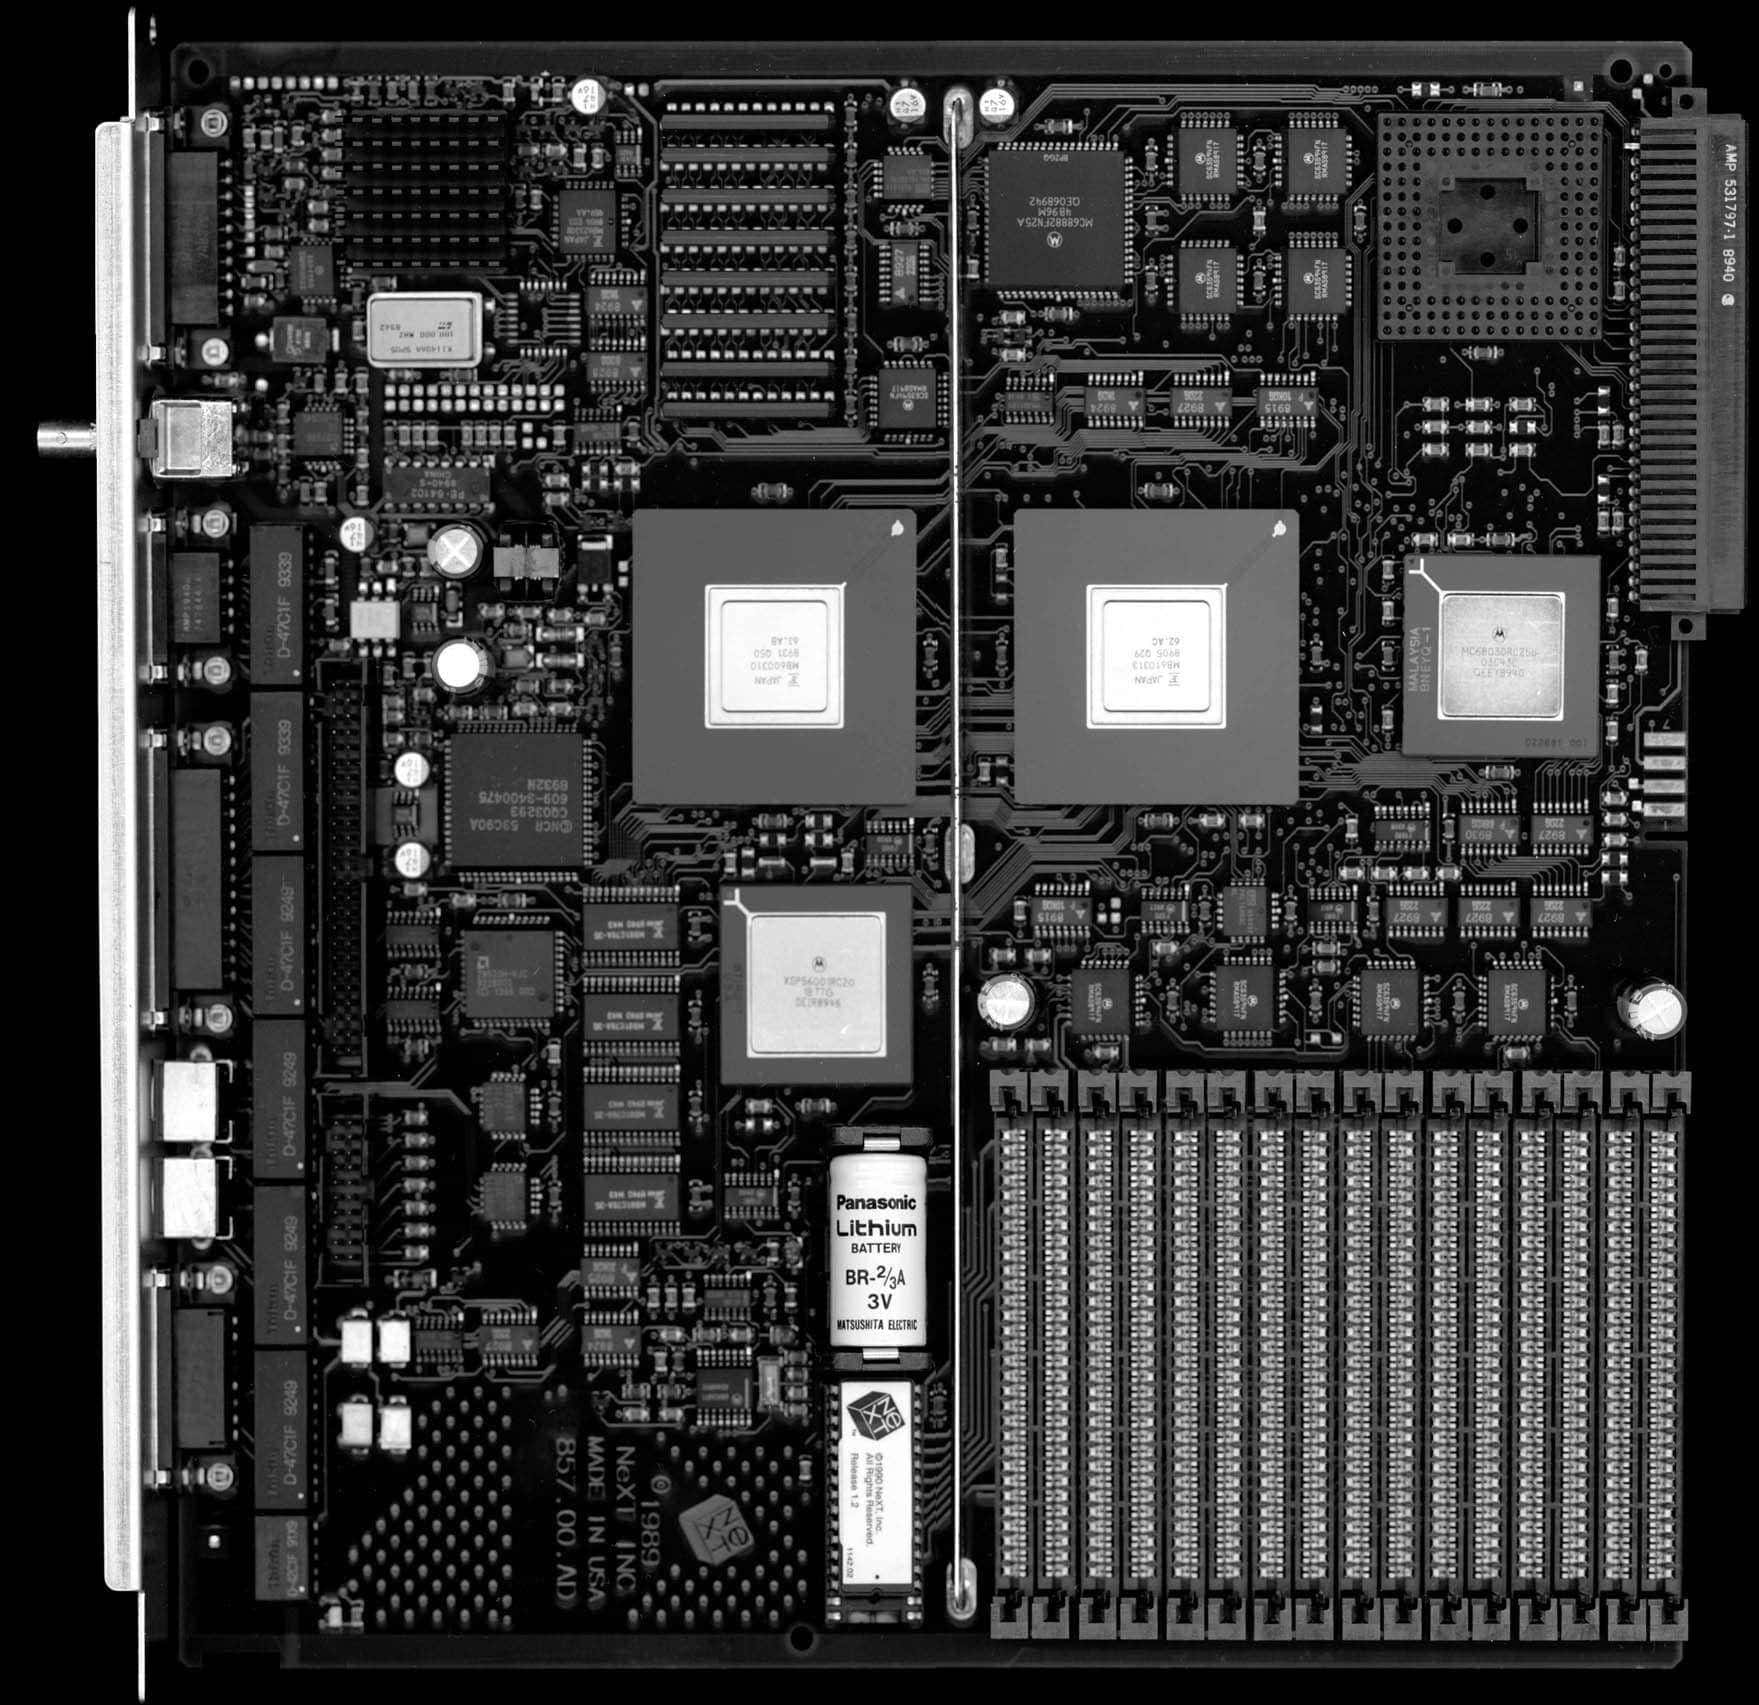 Close-up view of a computer motherboard